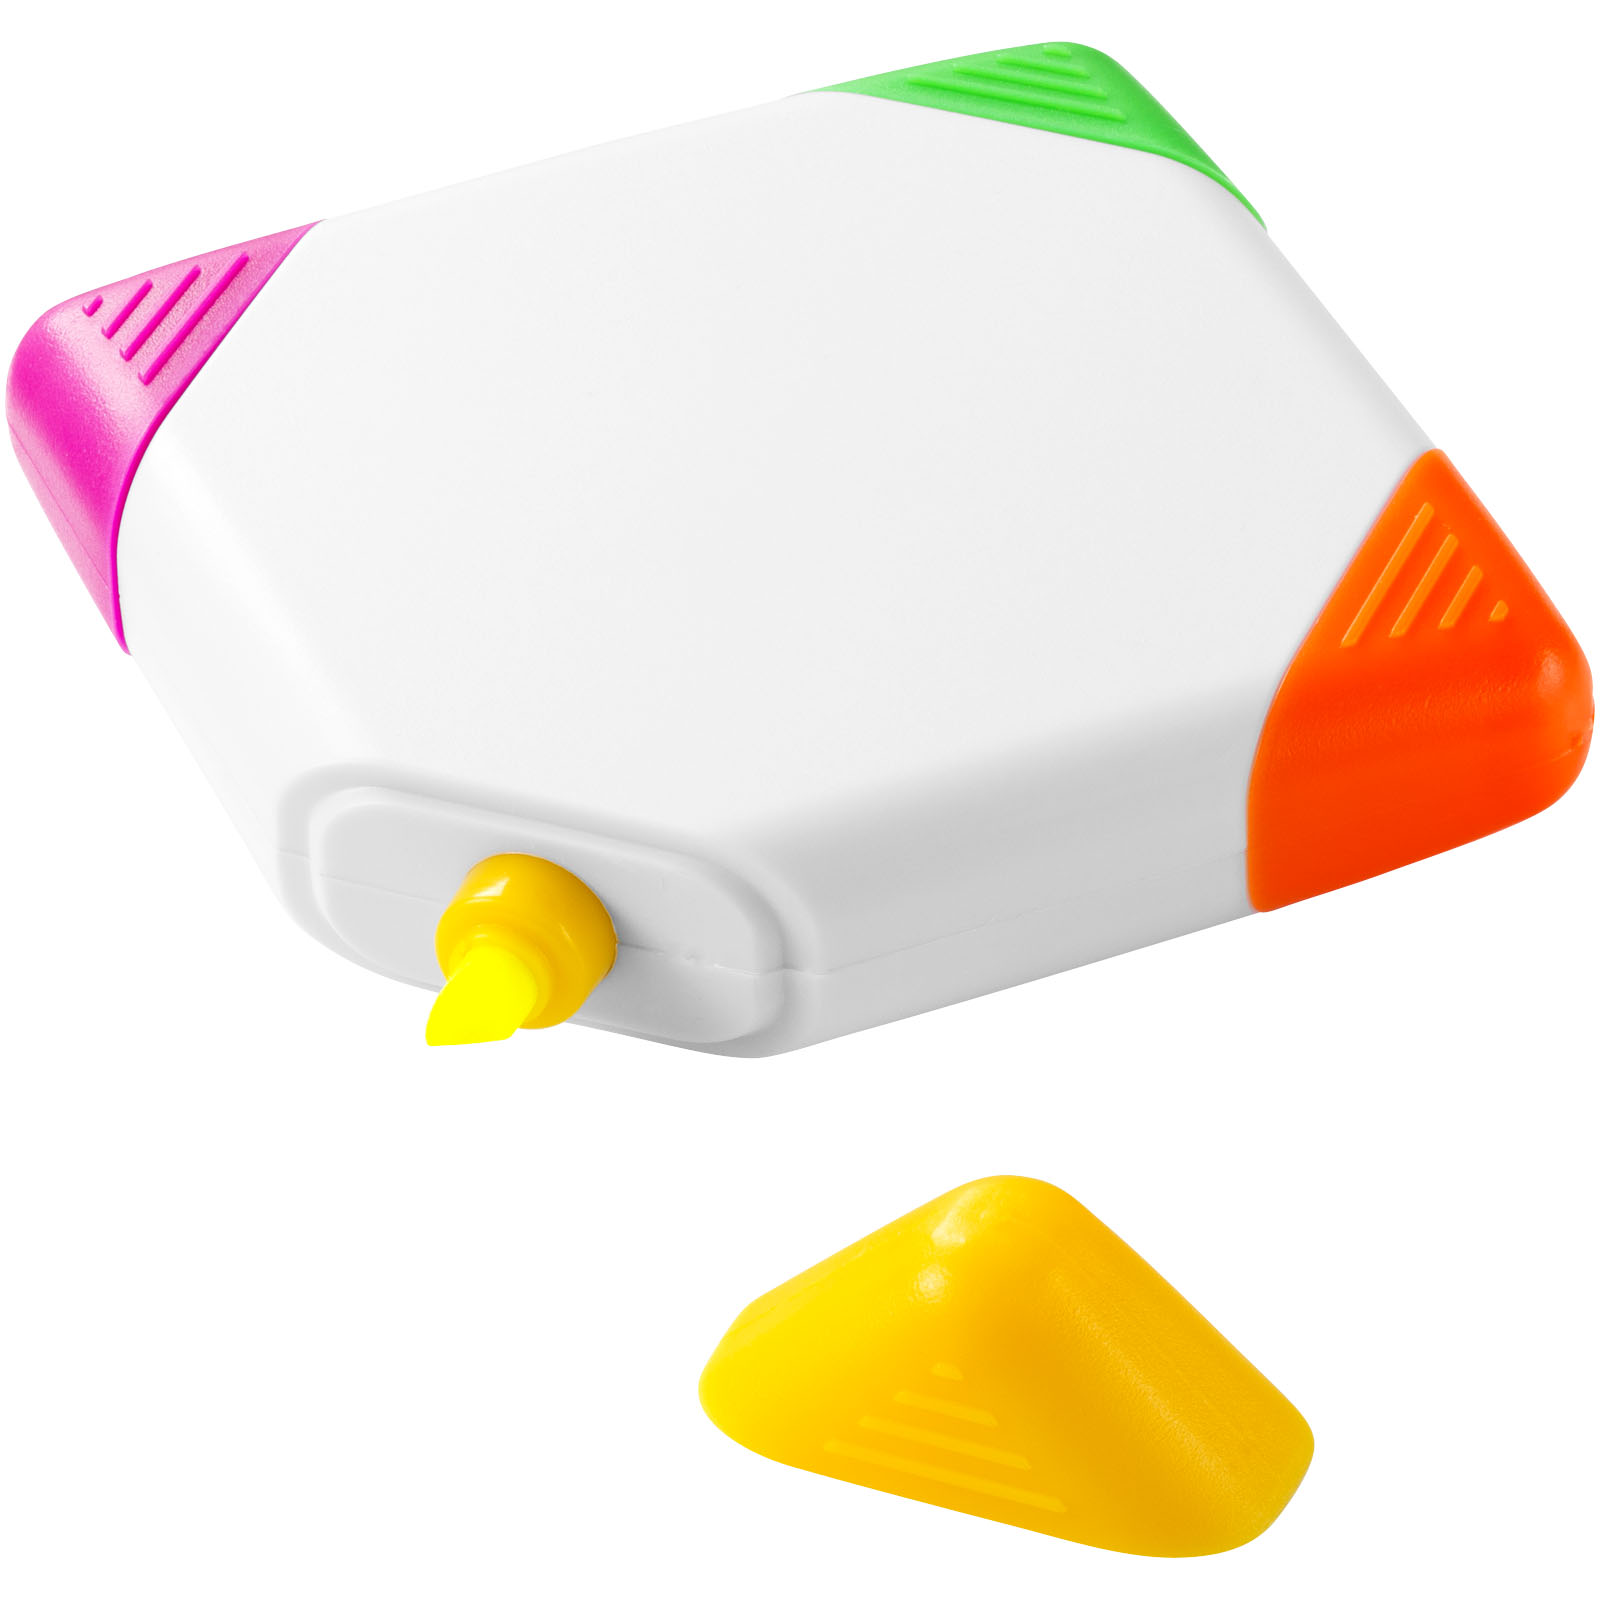 Square-shaped Multi-color Highlighter - Fritham